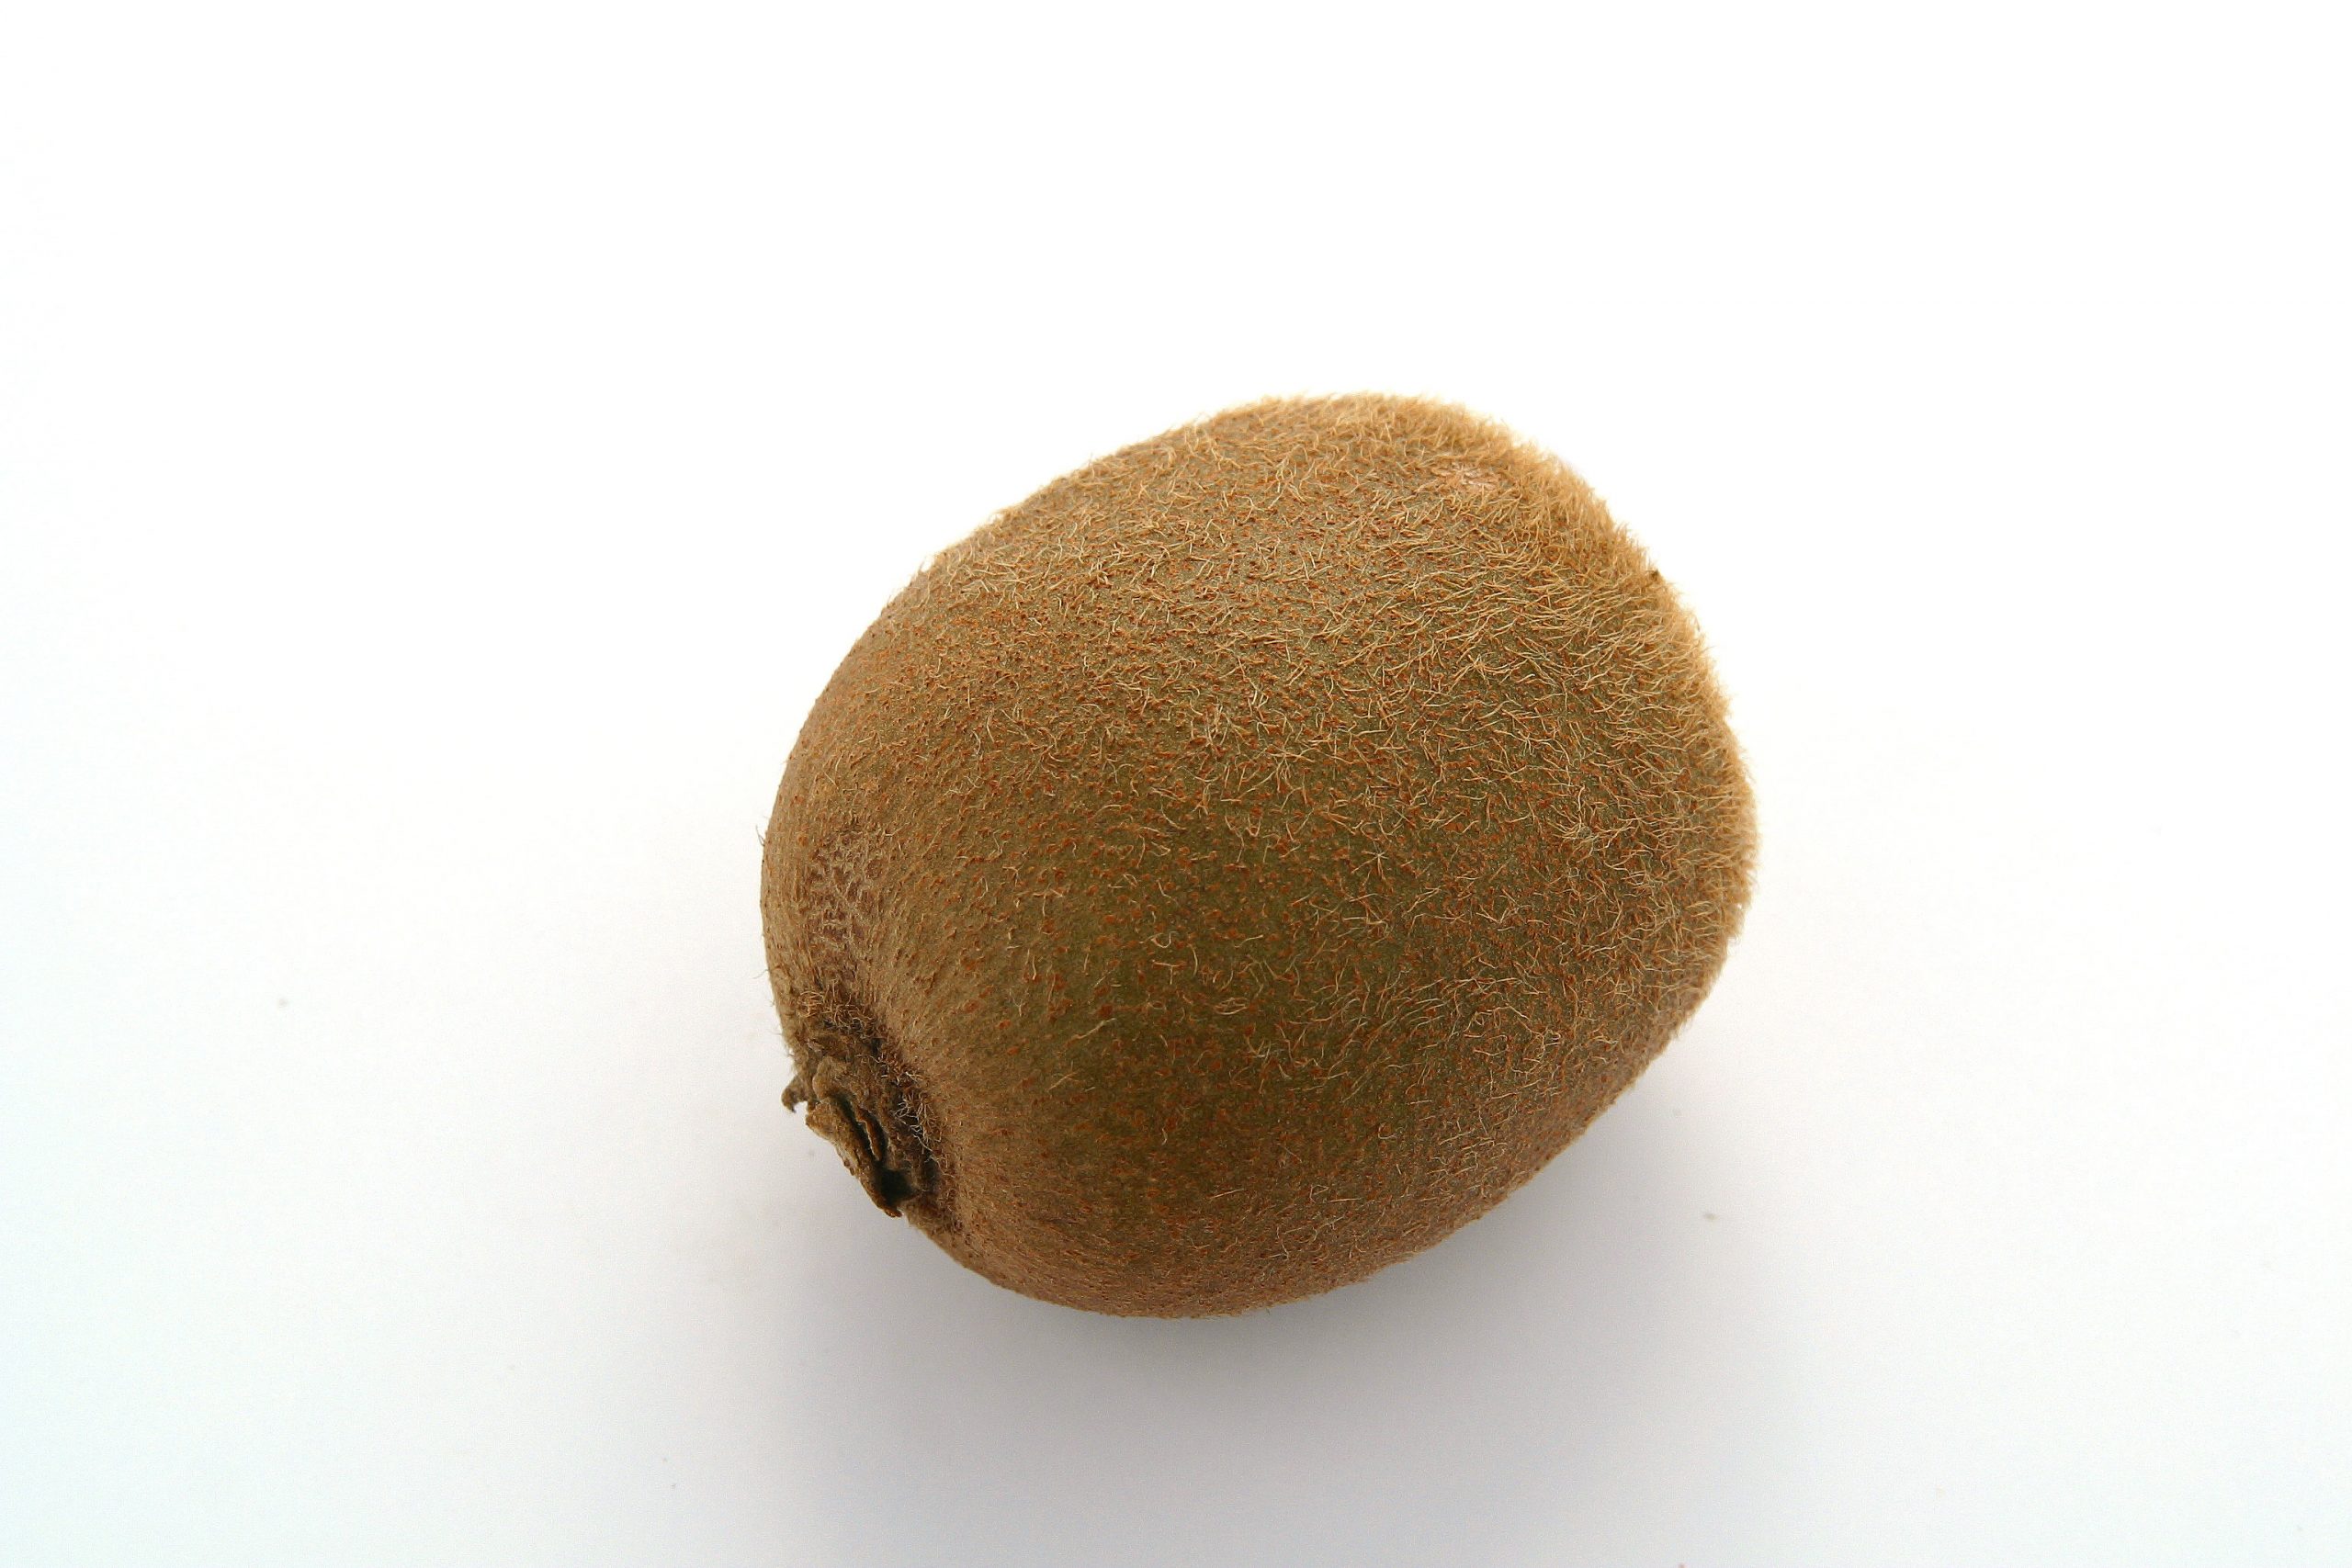 Kiwifruit are one of the biggest Italian fruit exports and 70% of the crop is grown for foreign markets.